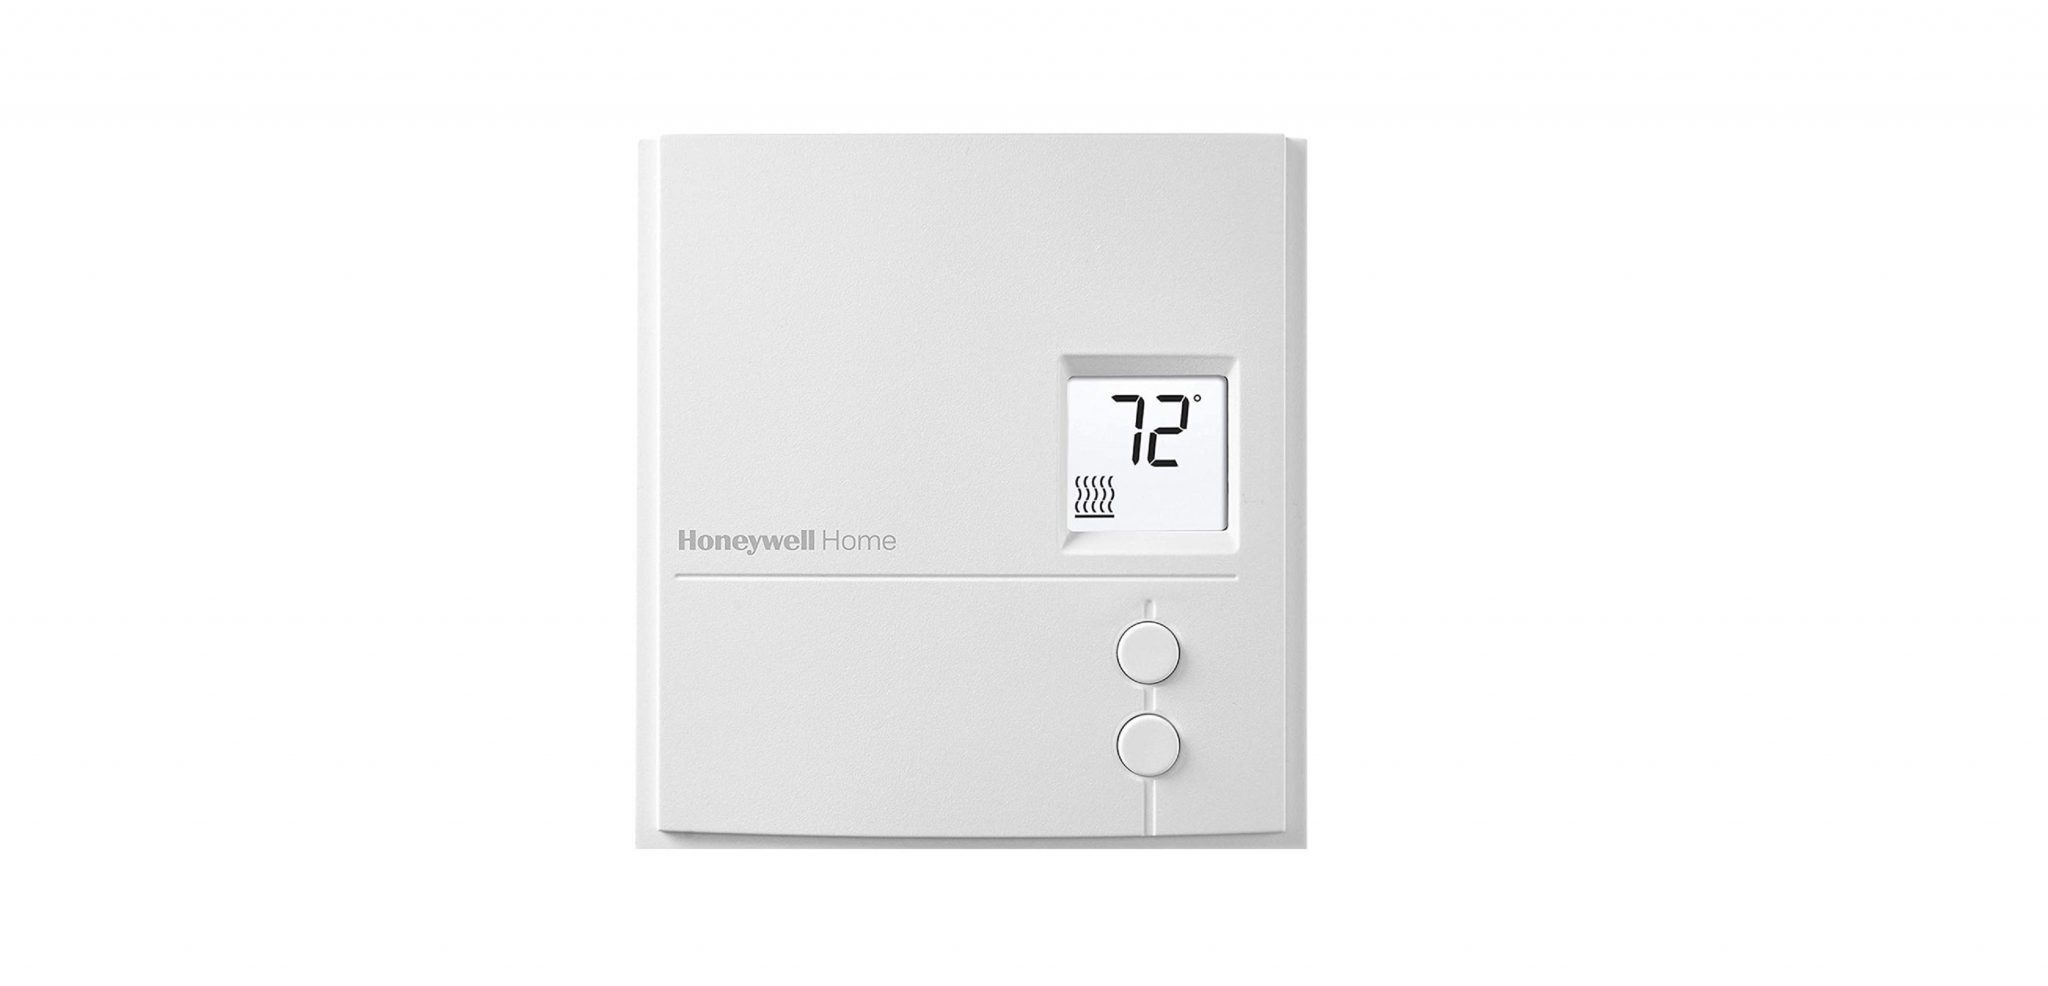 RLV3150 Electronic Thermostat